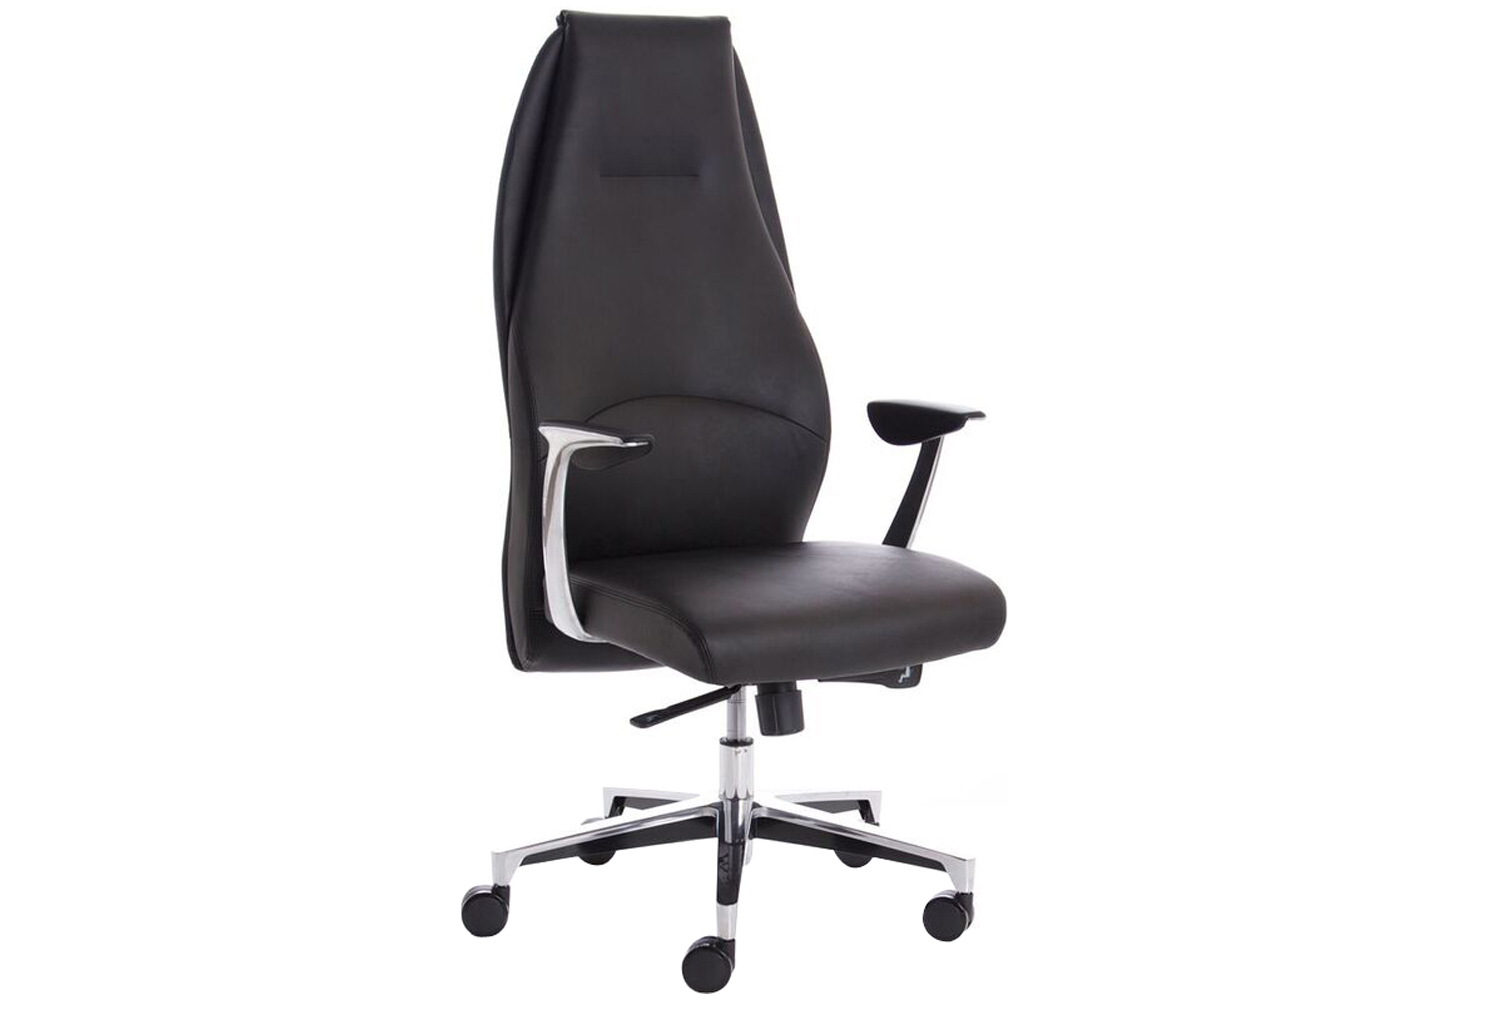 Sauda High Back Bonded Leather Executive Office Chair Black, Express Delivery